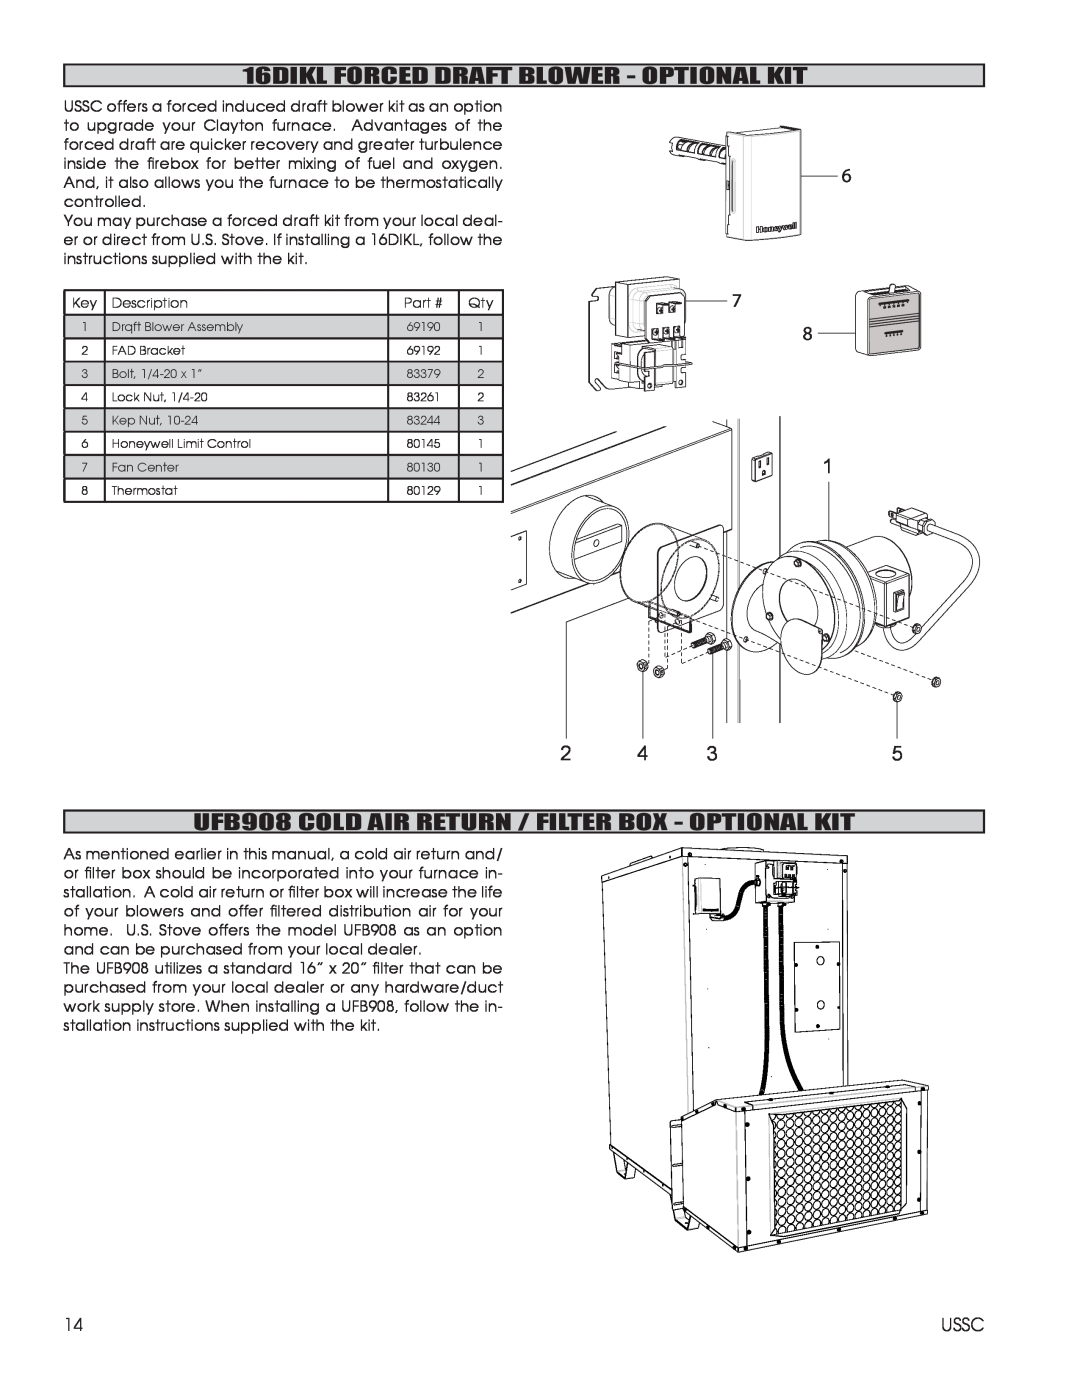 United States Stove 1602M installation instructions 16DIKL FORCED DRAFT BLOWER - OPTIONAL KIT 